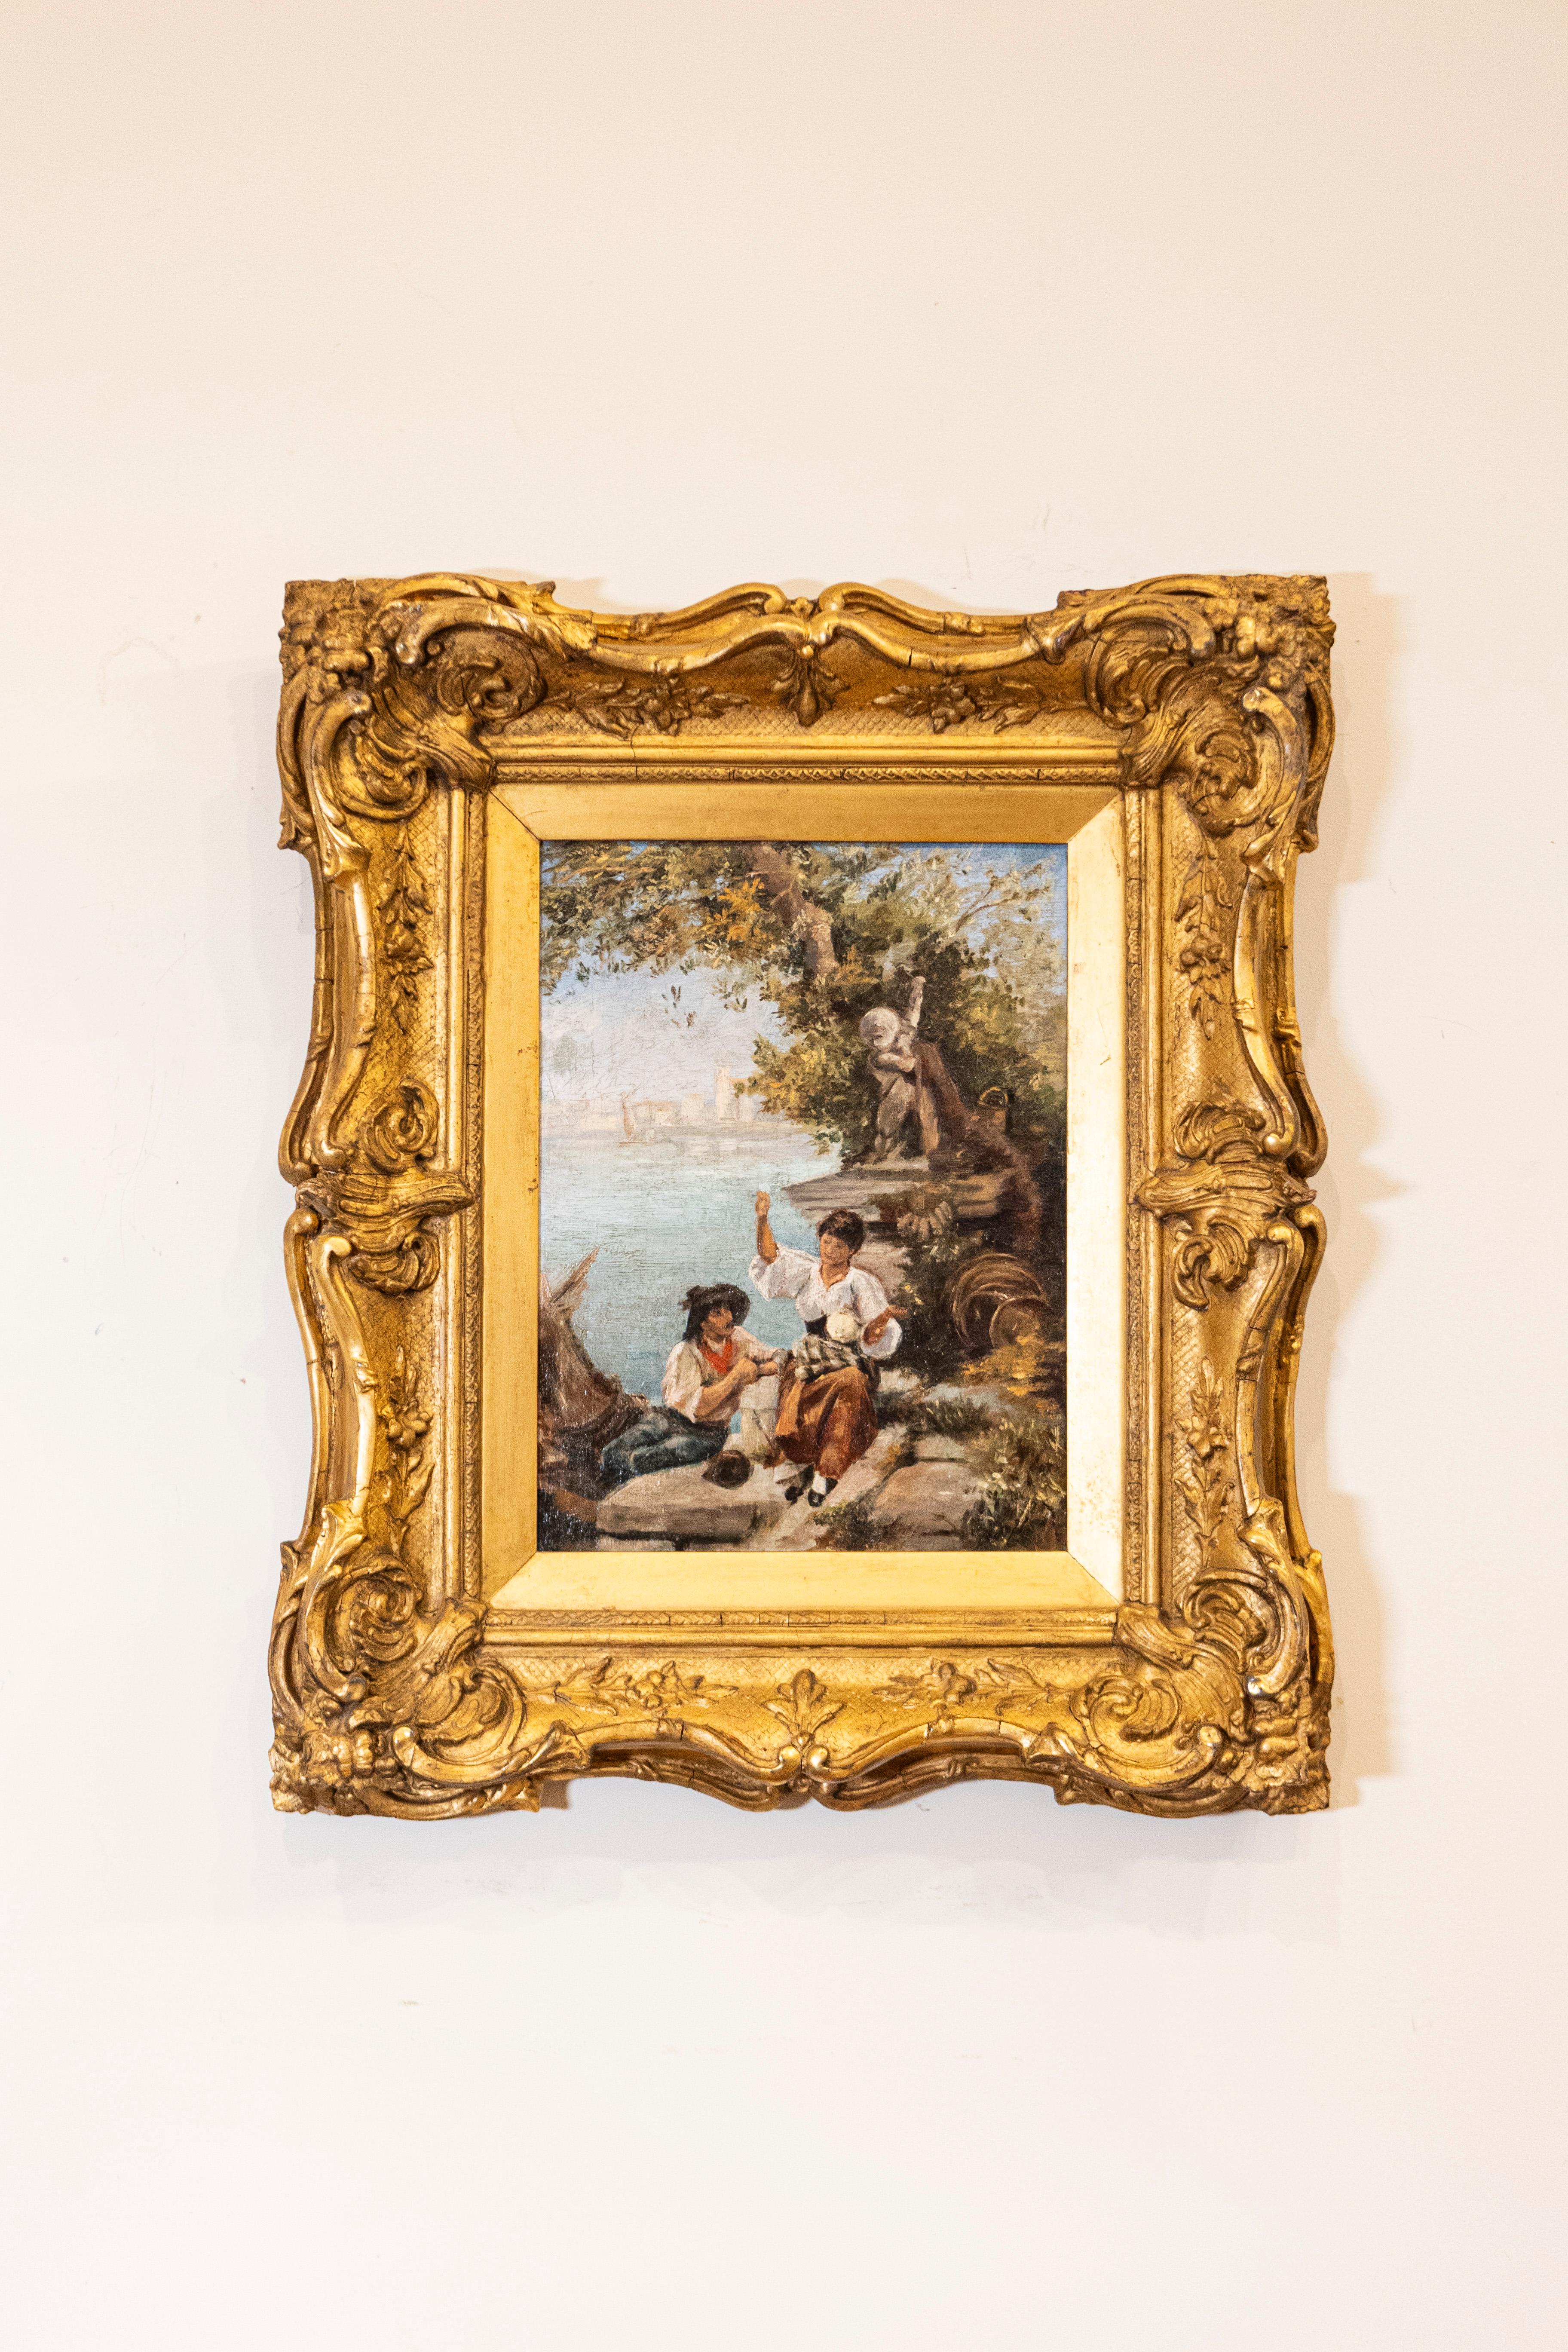 A French 19th century Continental School painting in carved giltwood frame, depicting a scene set in the Venetian lagoon. Created in France during the 19th century, this Continental School painting depicts a humbly dressed man and woman sitting on